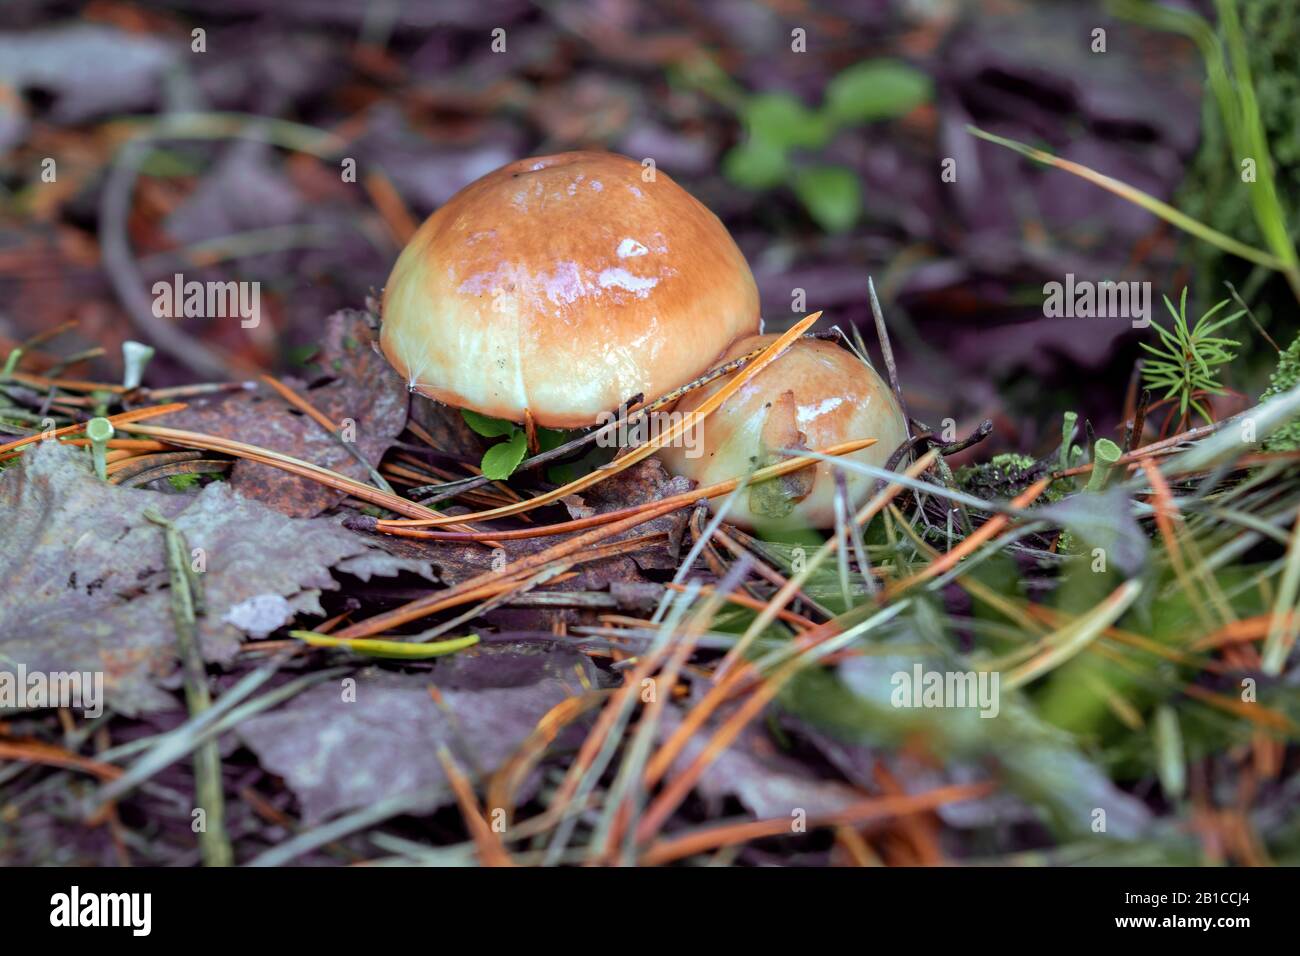 Close-up a of mushrooms in the natural environment Forest mushroom. Stock Photo